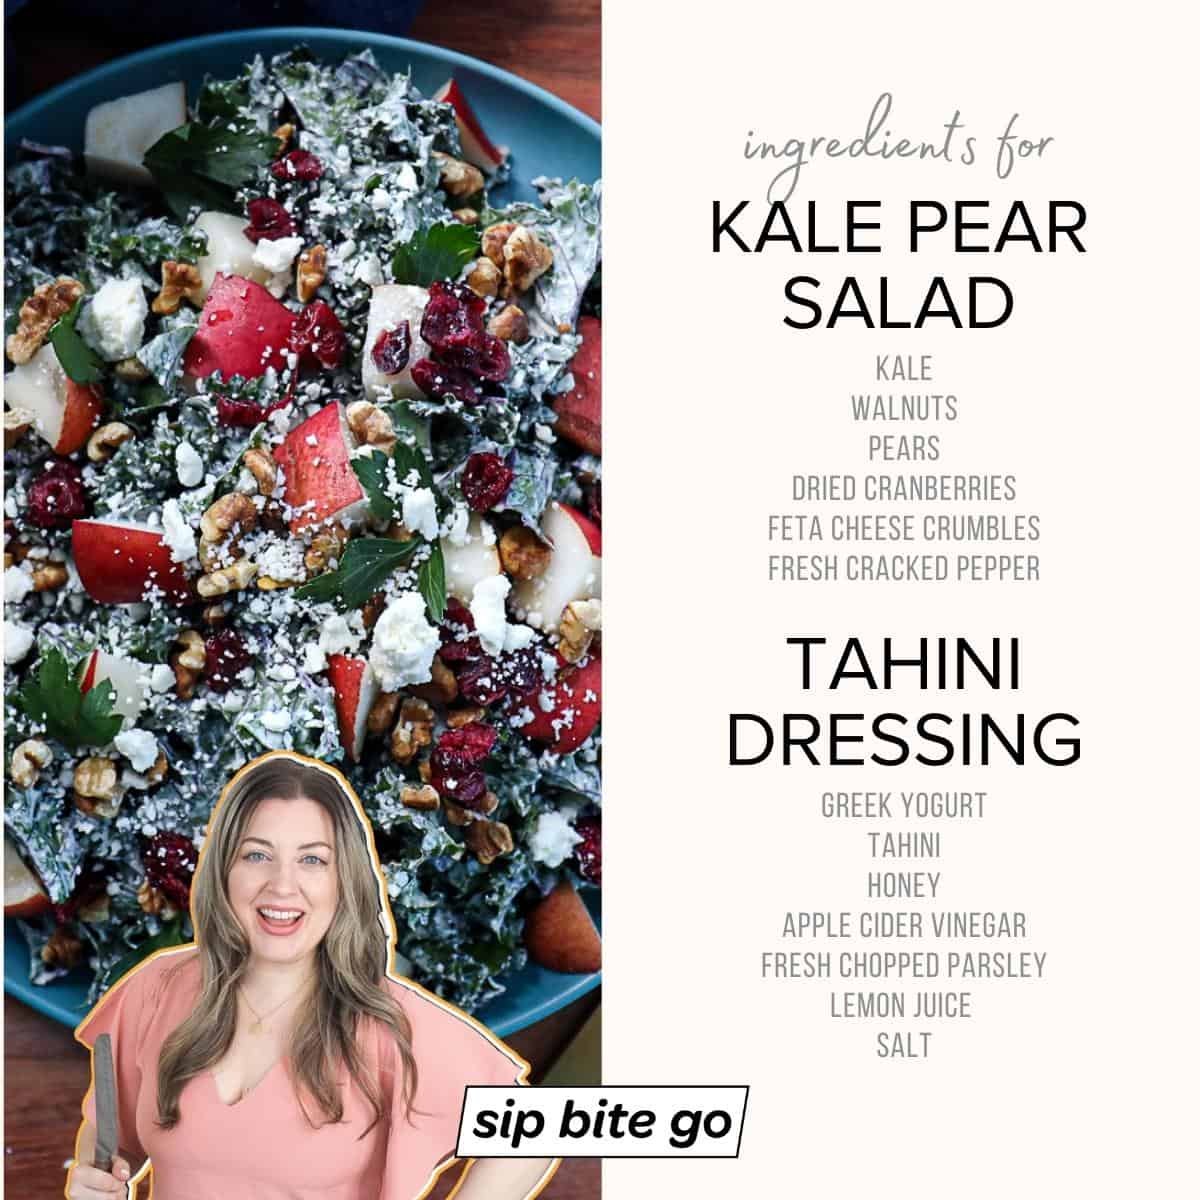 Infographic with ingredients for kale pear salad with tahini dressing